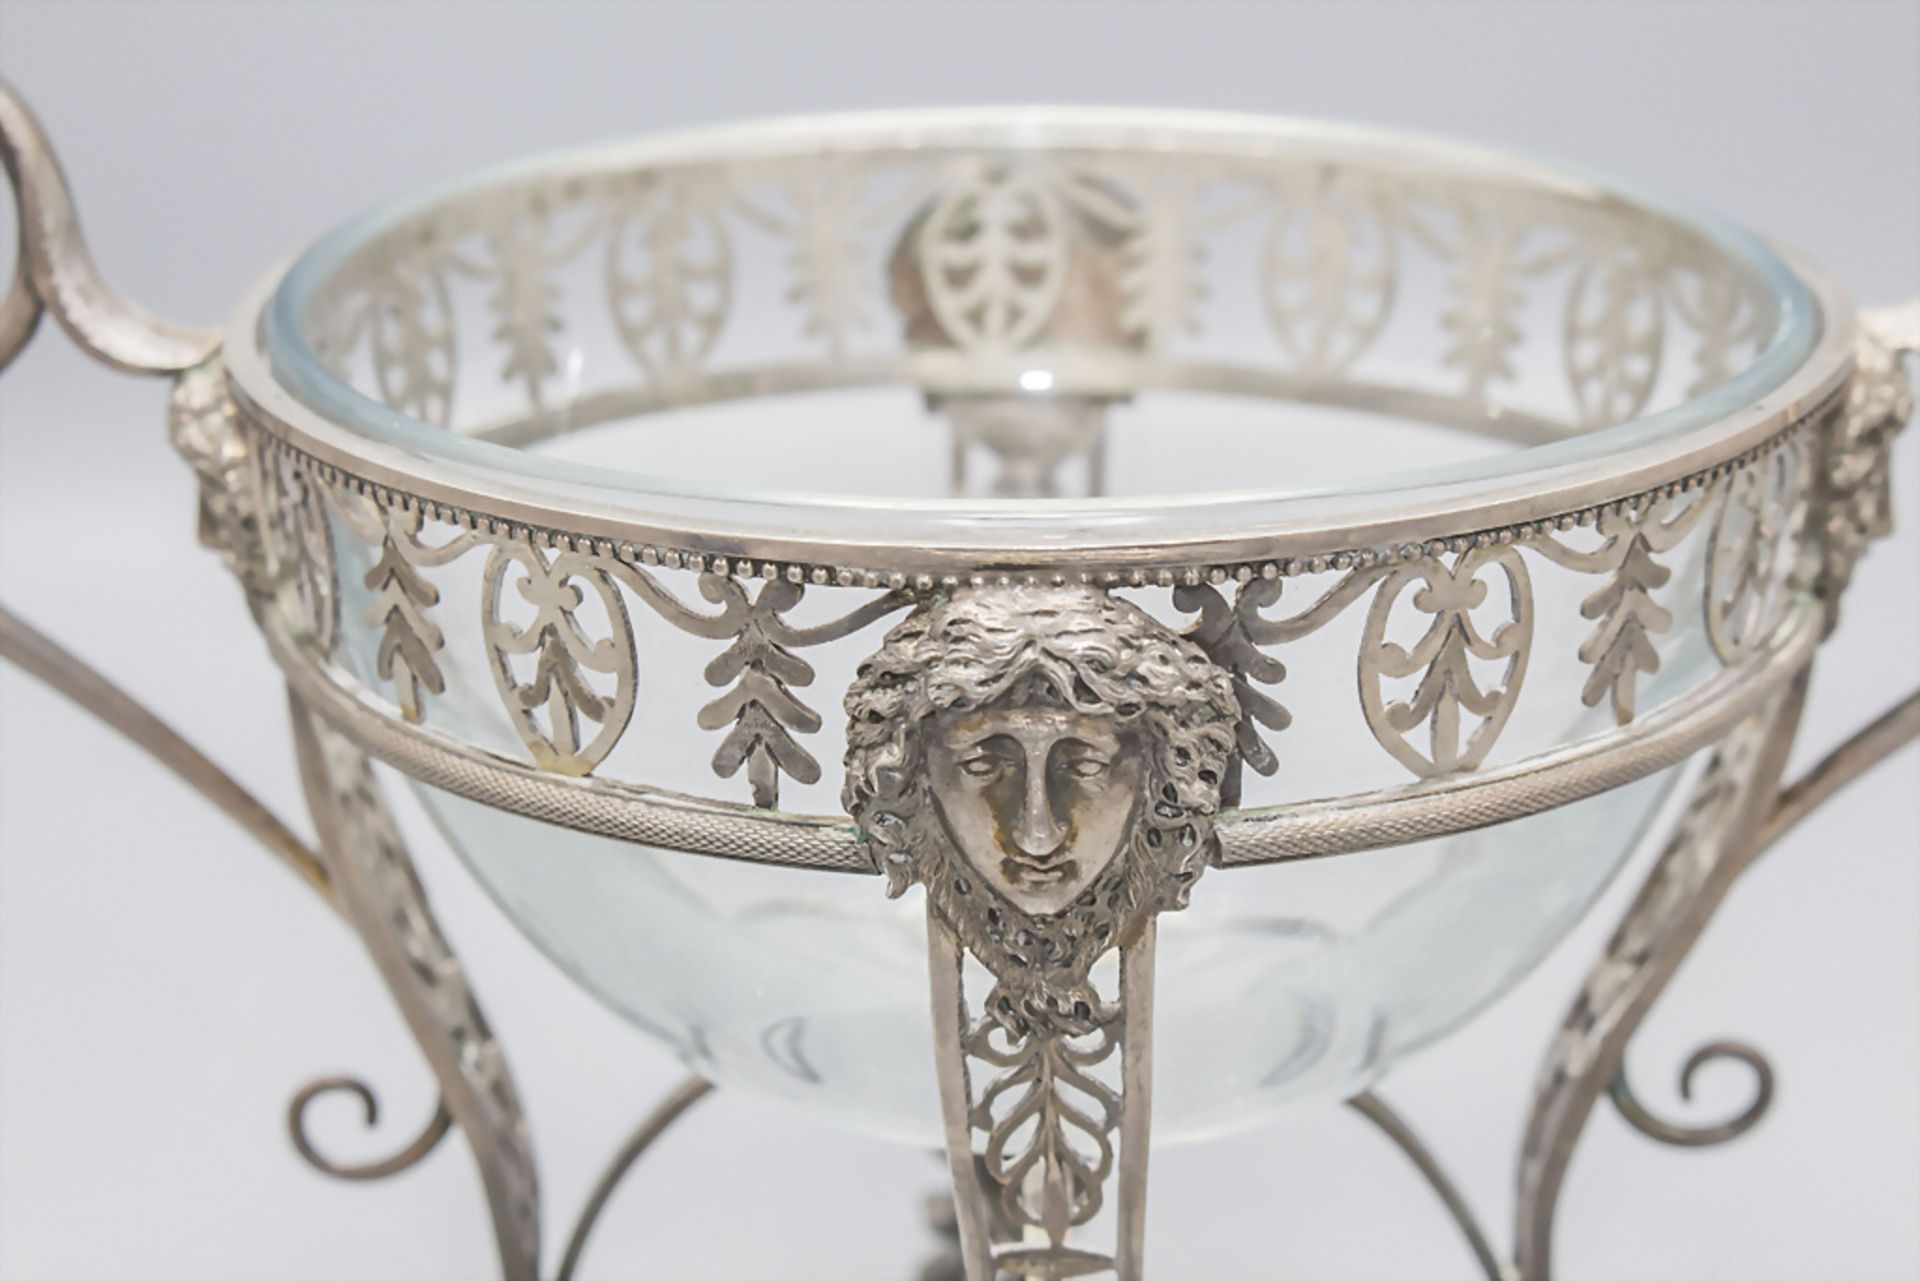 Empire Bonbonniere / An Empire silver candy bowl with lid, Paris, 1798-1809 - Image 5 of 6